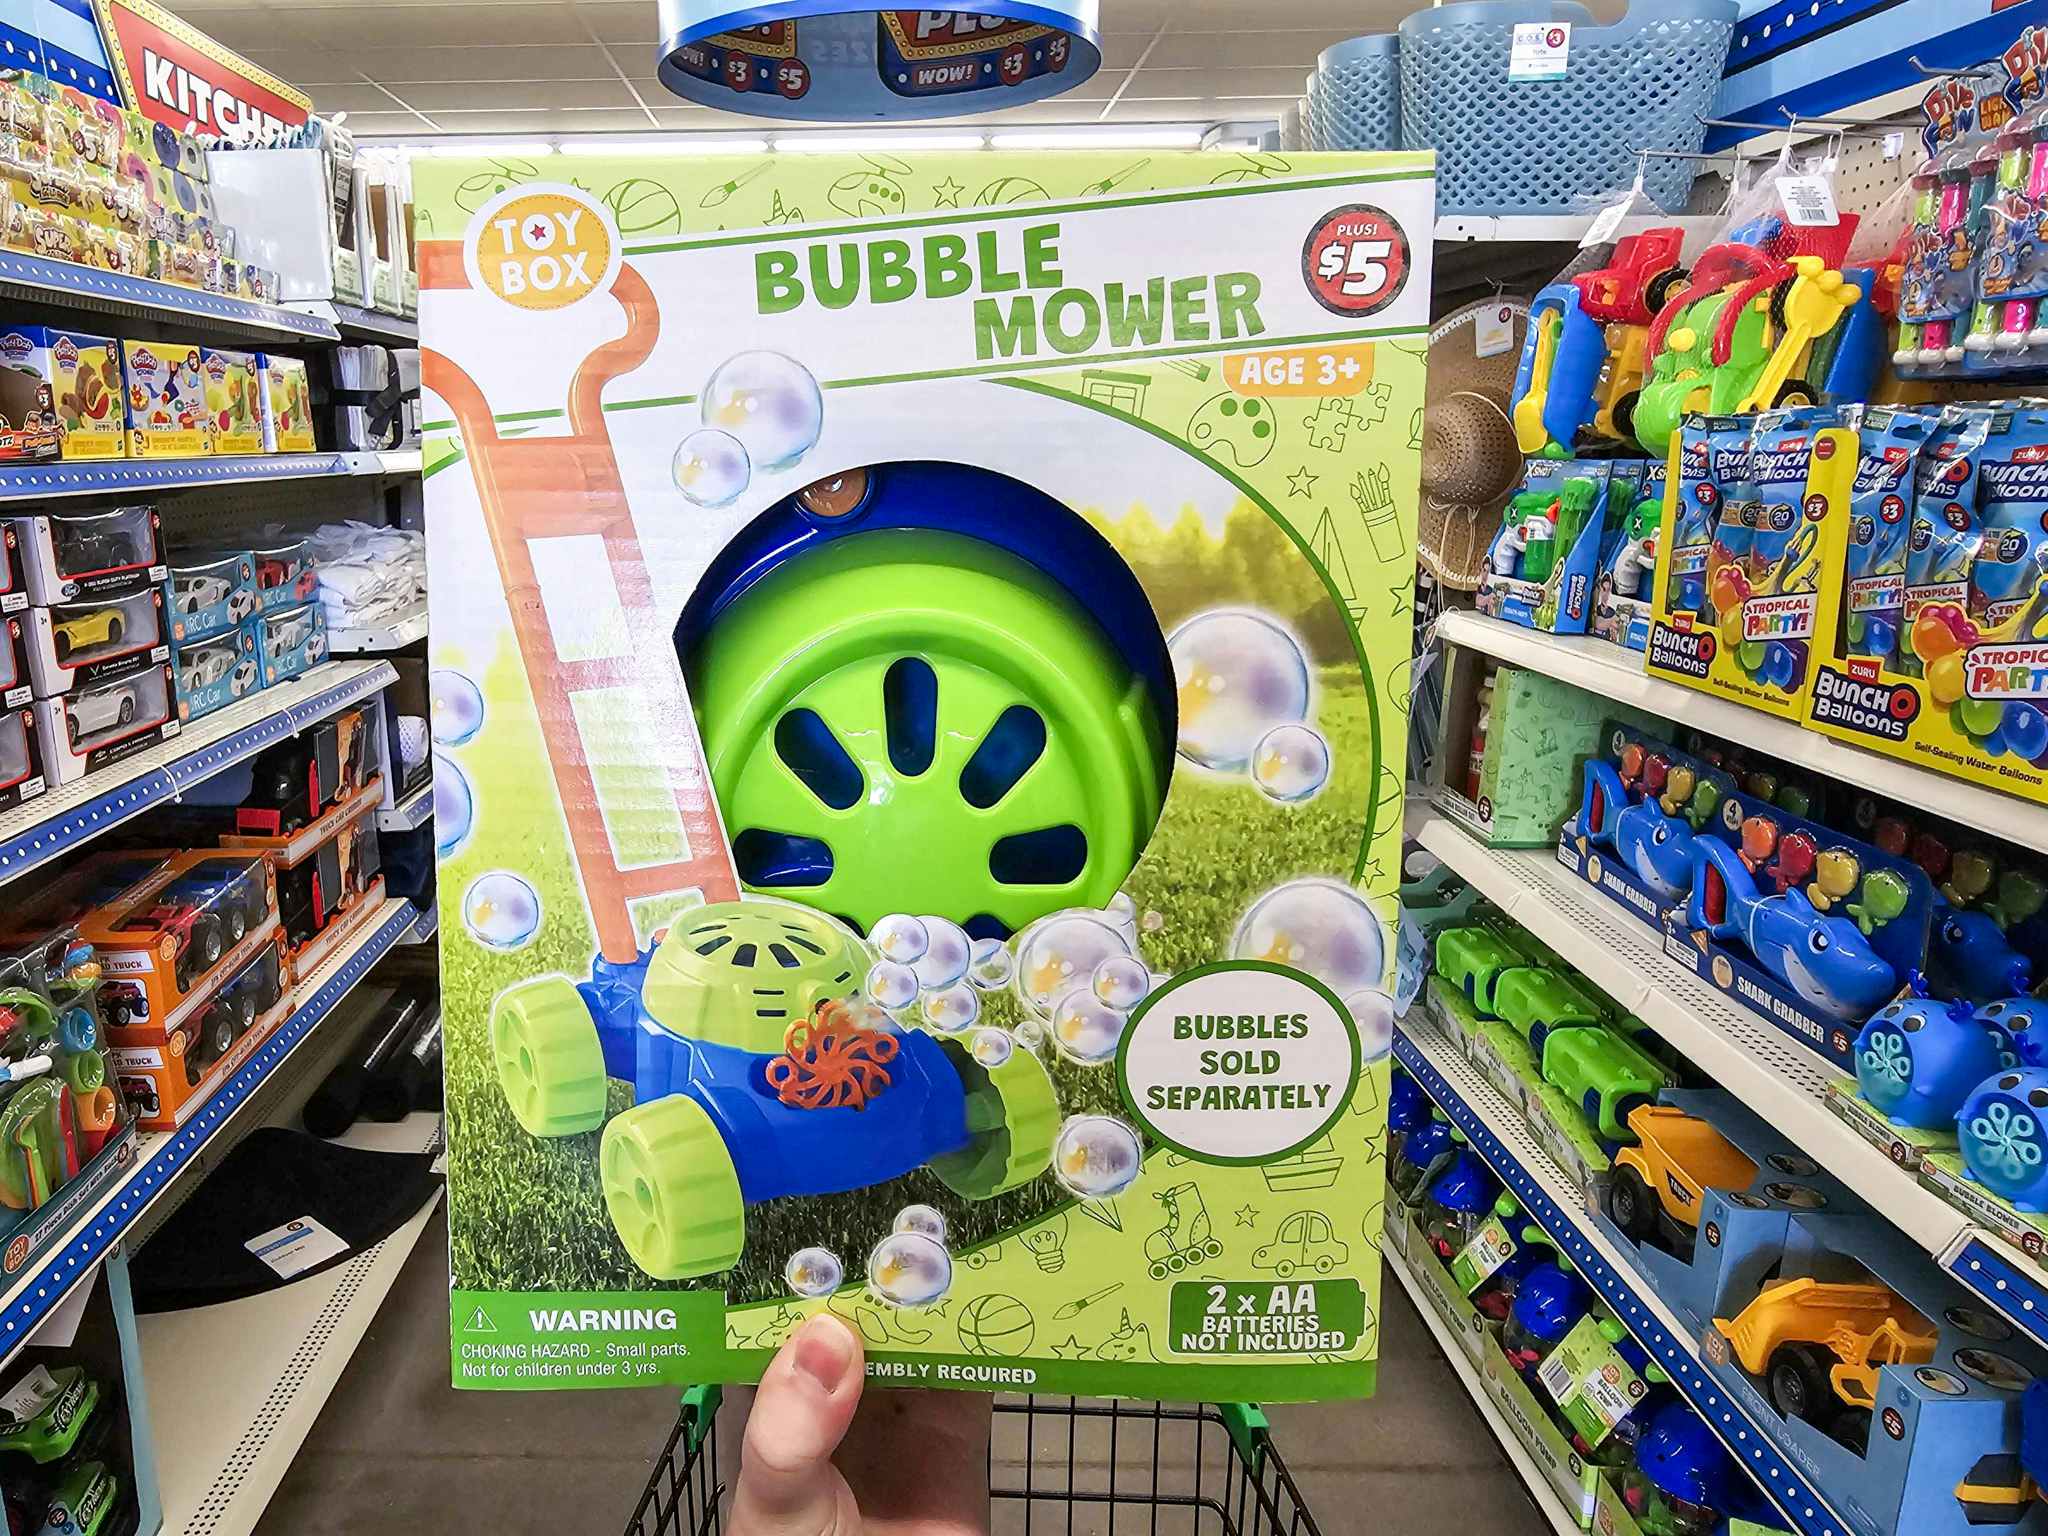 person holding a bubble mower in an aisle